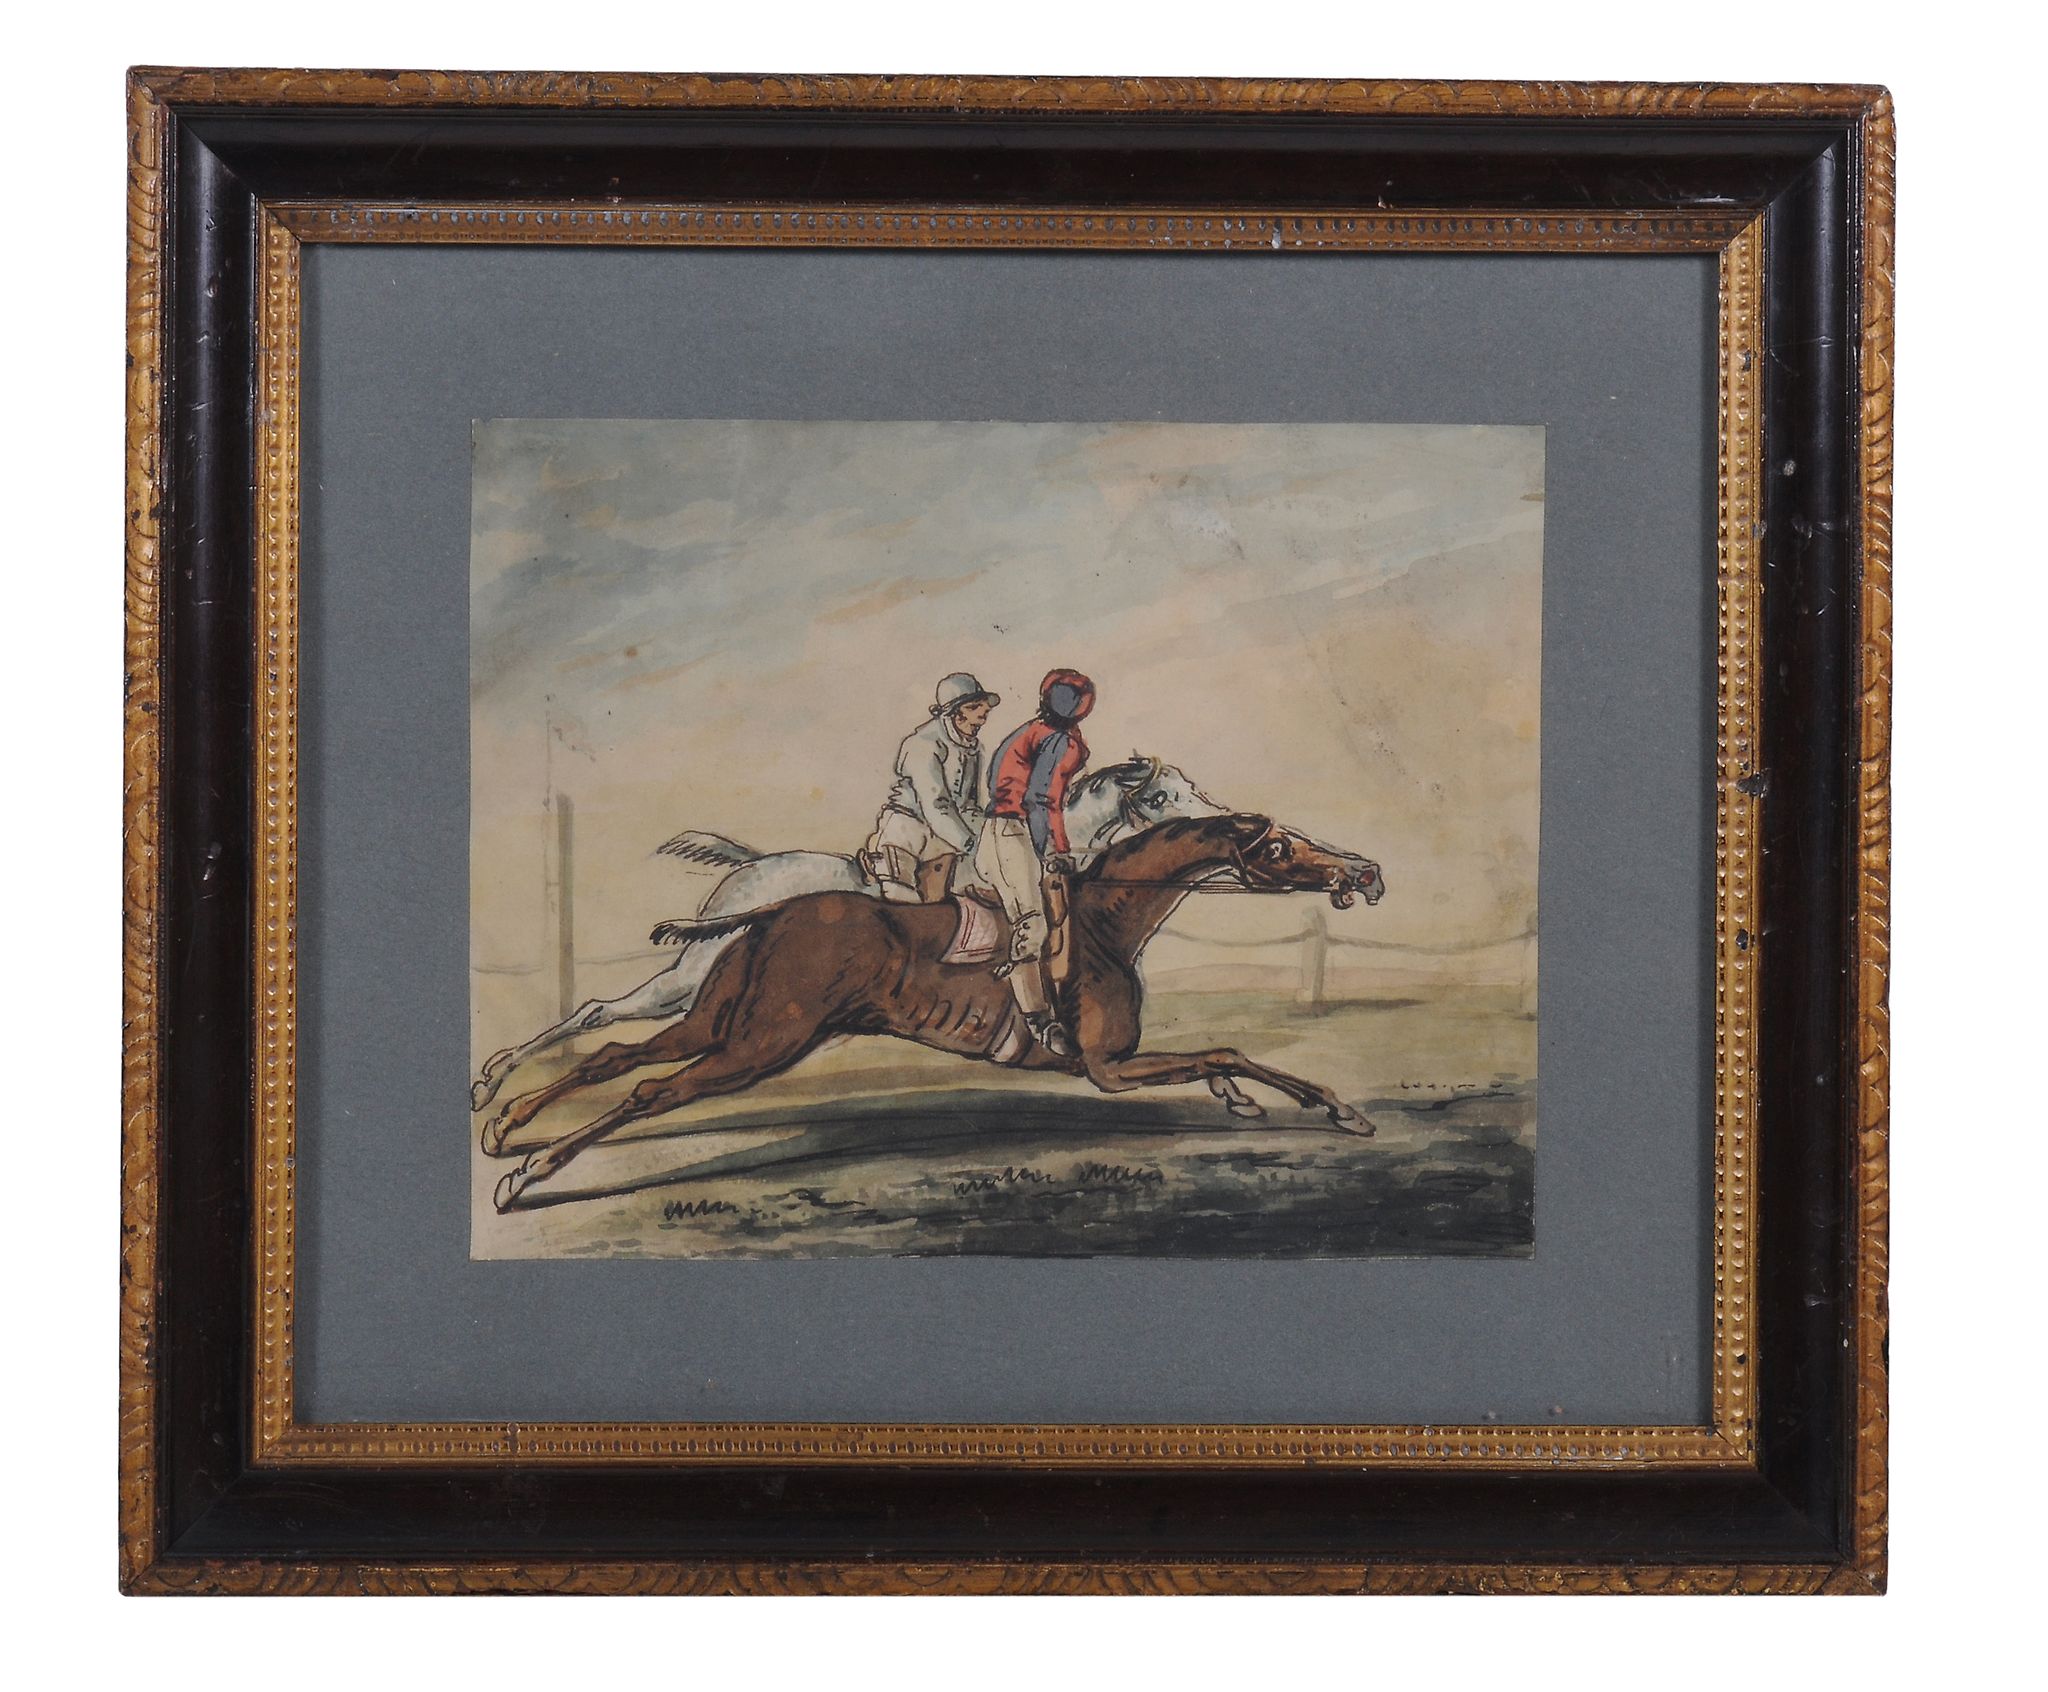 George Moutard Woodward (1760-1809)  Horse Racing  Watercolour  17 x 21.5 cm. (6 7/8 x 8 1/2 in) - Image 2 of 3